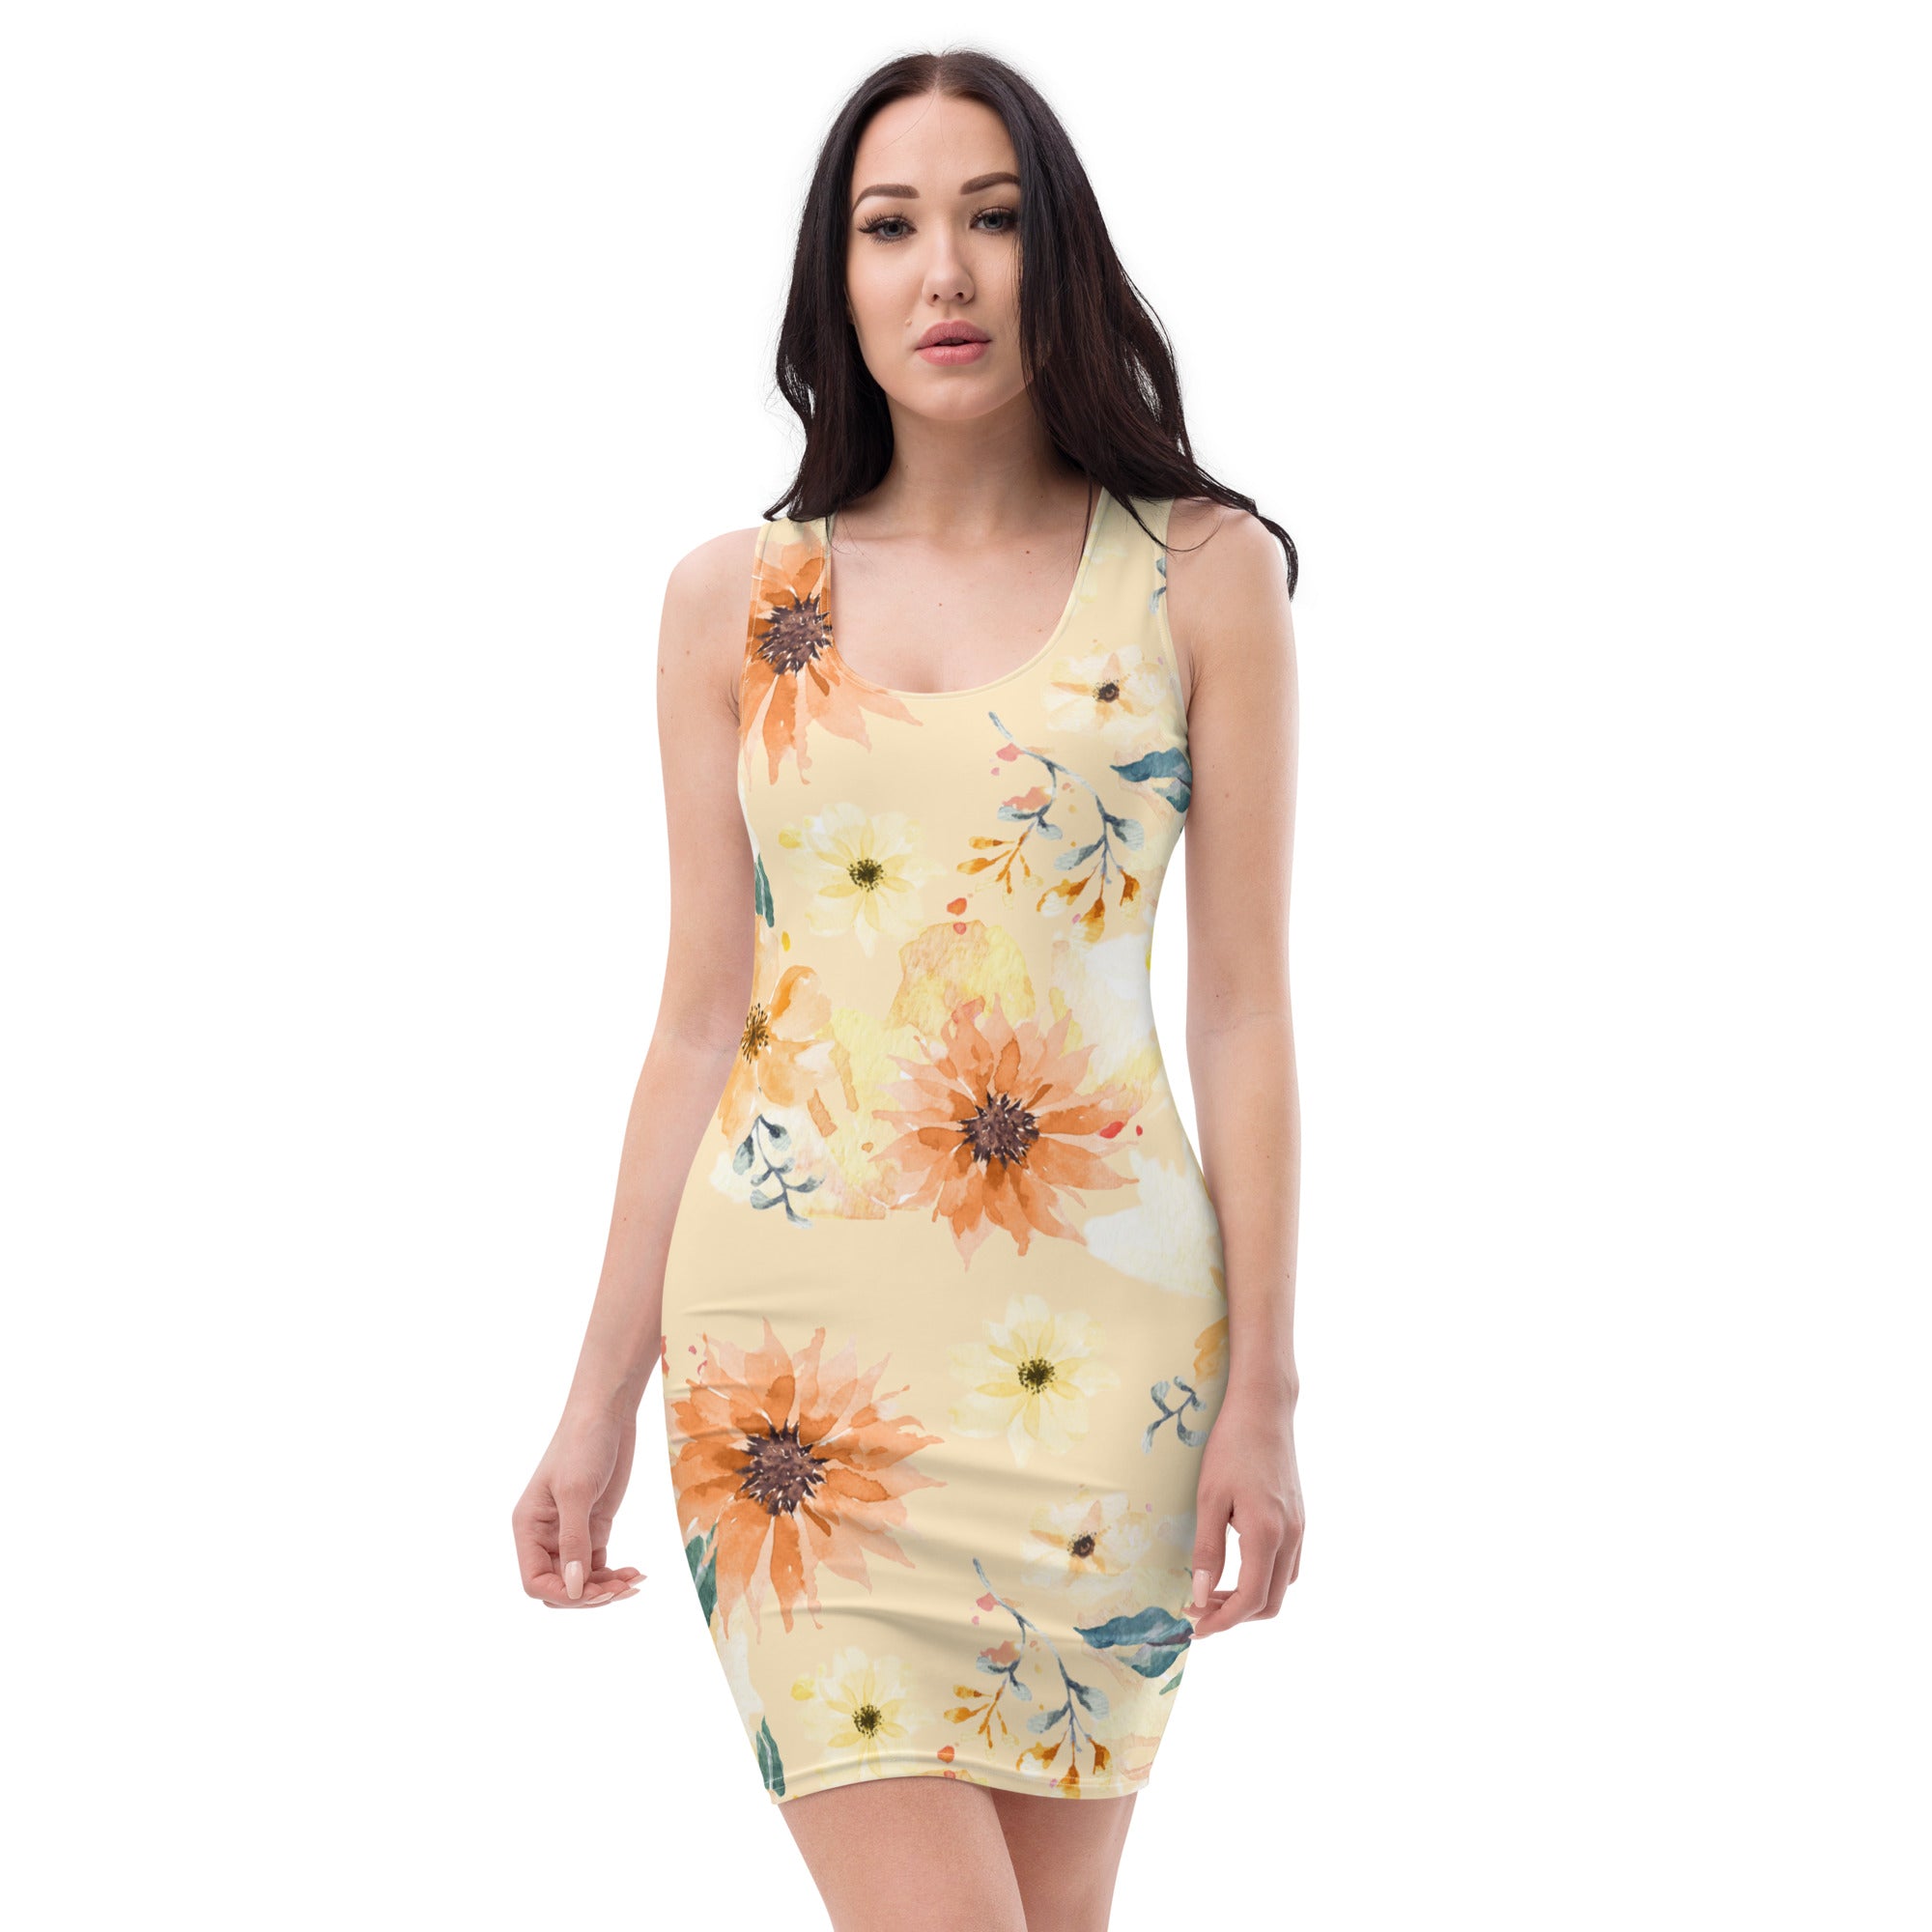 "Floral Bloom: Women's Spring-Summer Fitted Dress", lioness-love